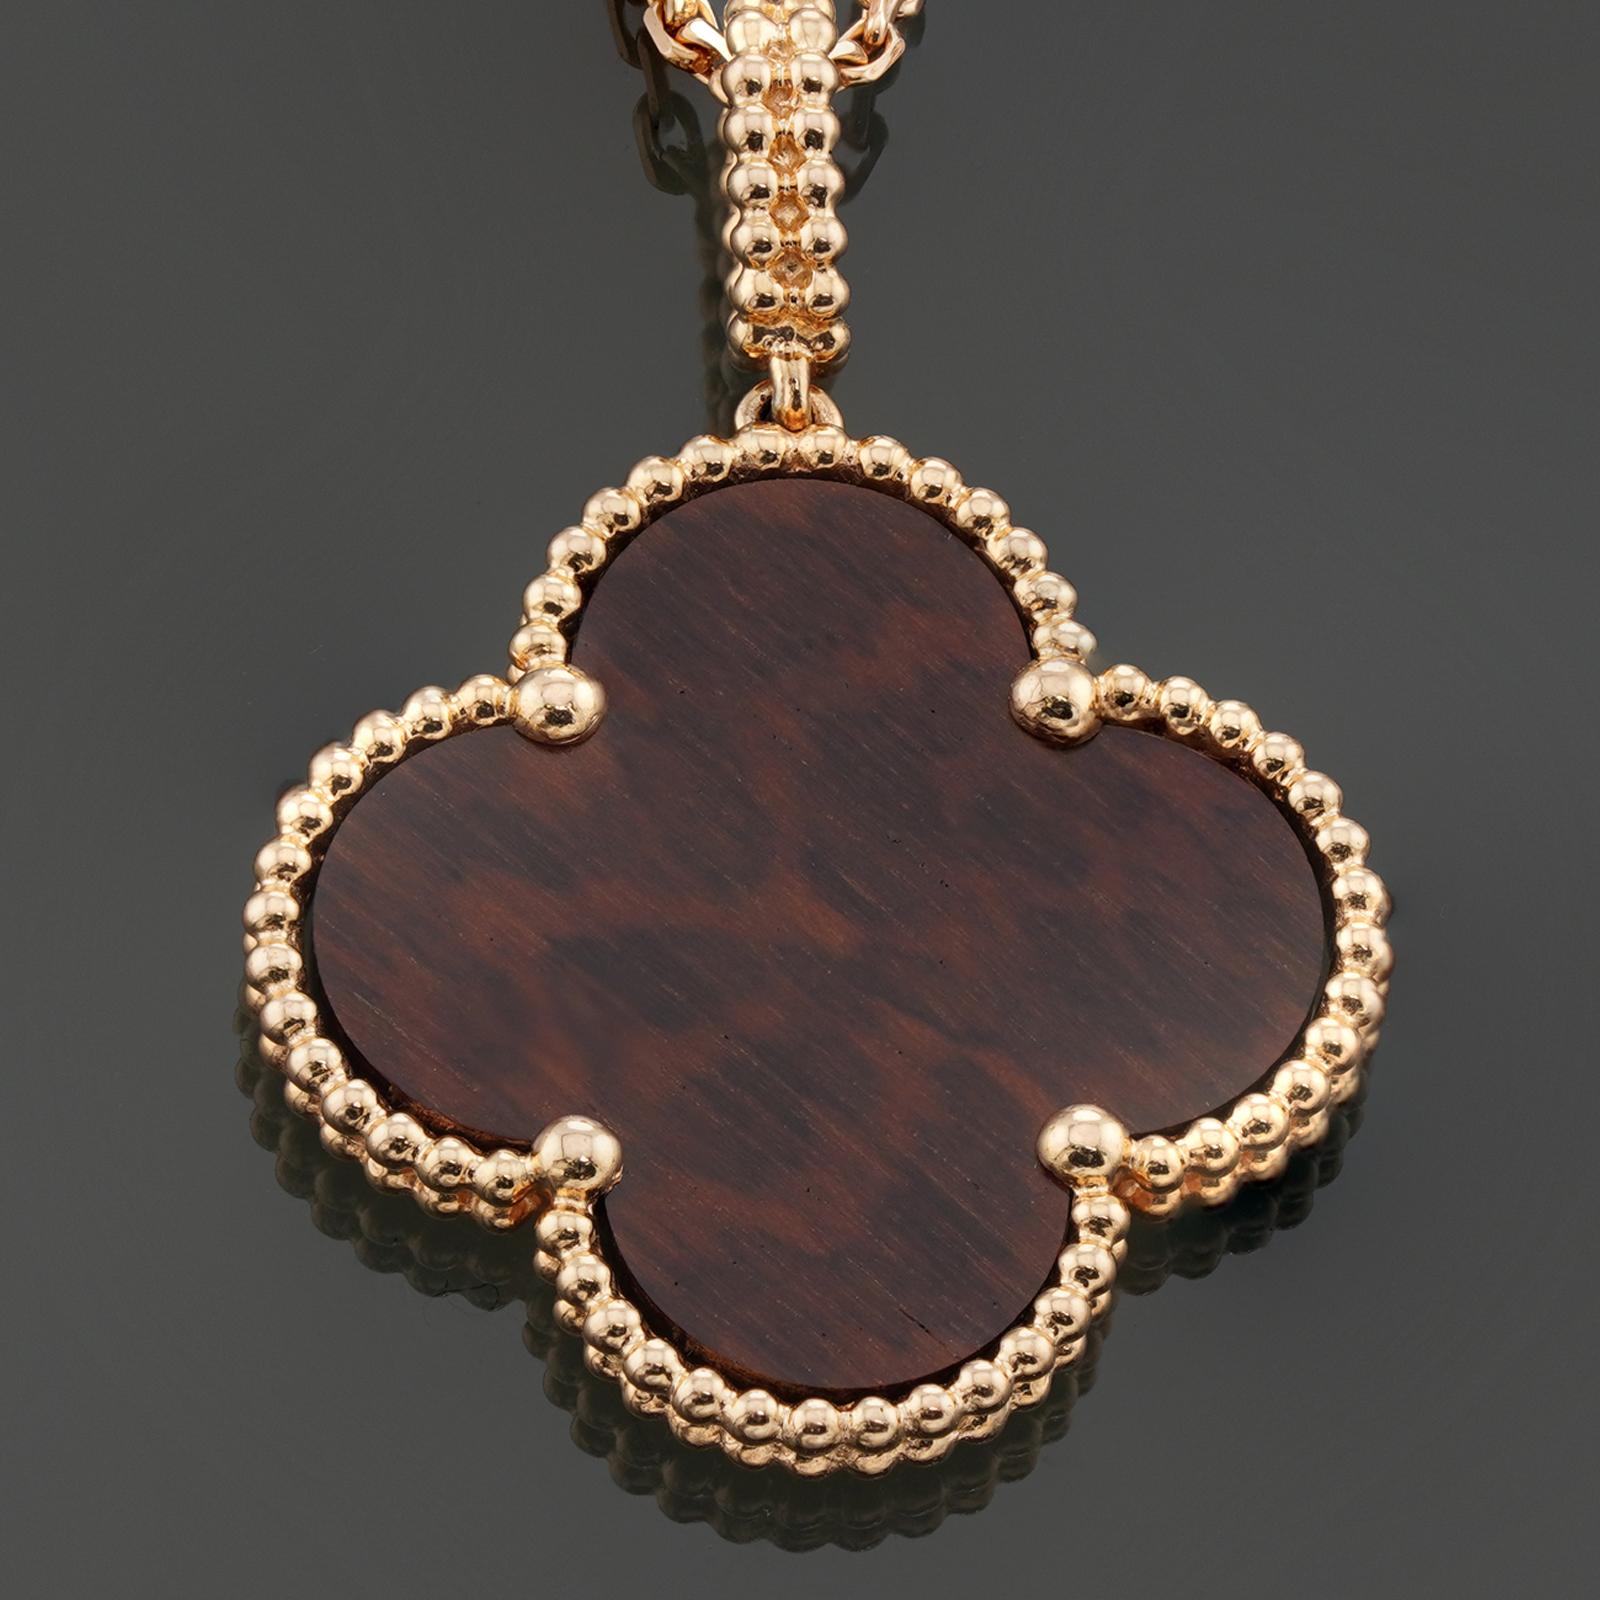 This gorgeous Van Cleef & Arpels necklace is crafted in 18k rose gold and features a letterwood pendant. The Magic Alhambra collection inspired by lucky four-leaf clovers and the scalloped archways of the Alhambra Palace. Made in France circa 2000s.